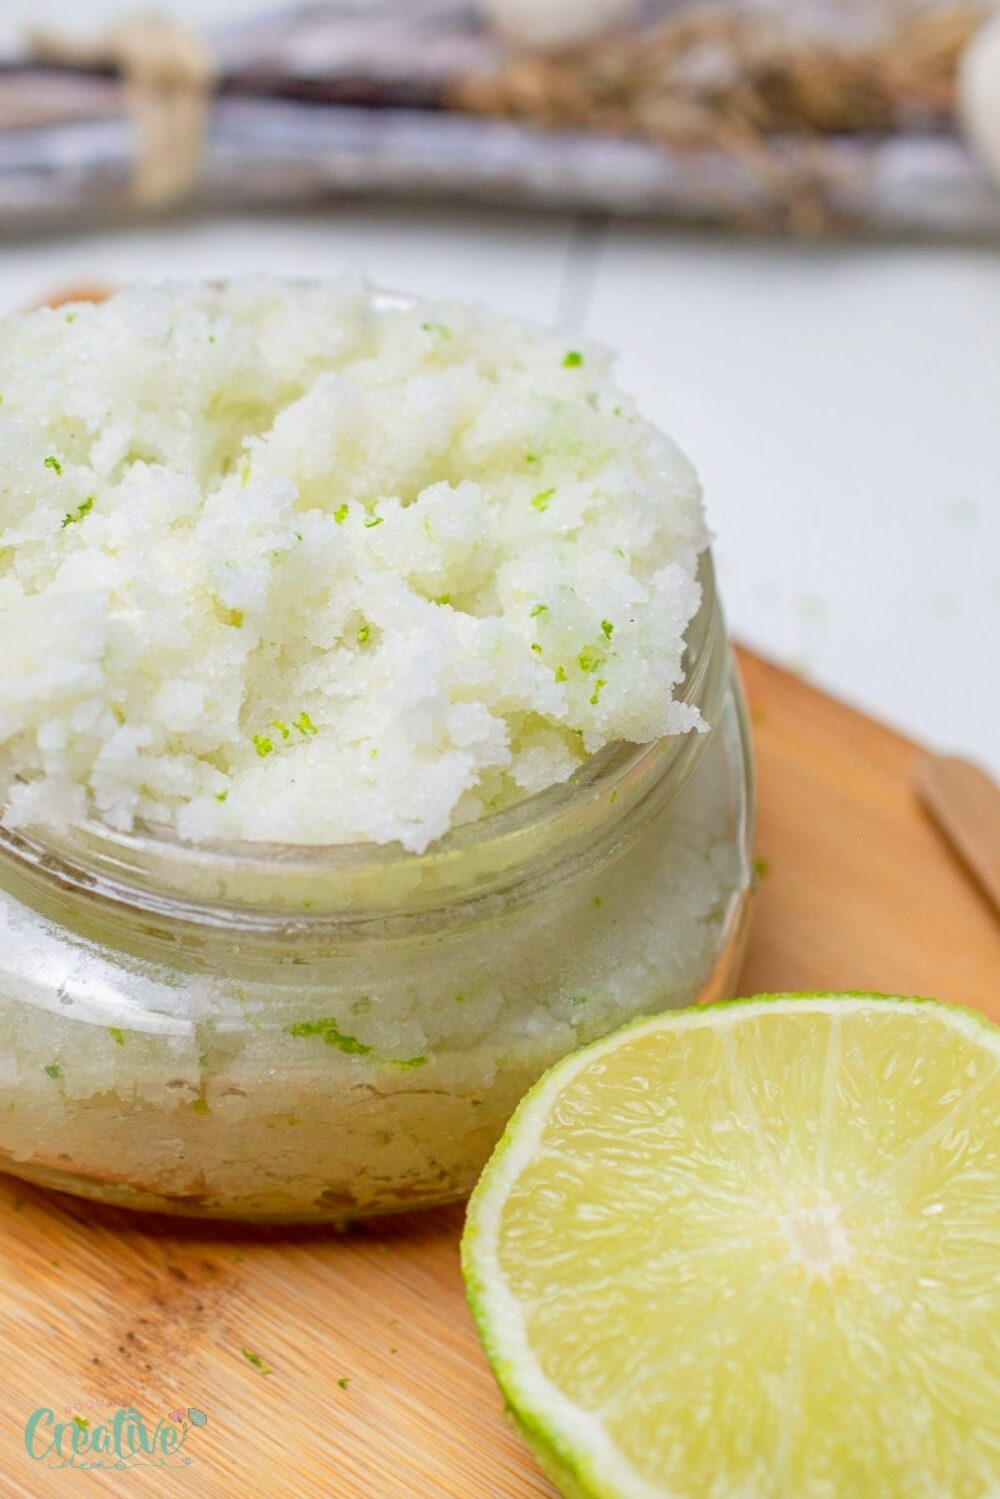 Get glowing, smooth skin with this homemade coconut lime body scrub recipe. Exfoliate with lime and sugar, hydrate with coconut oil!